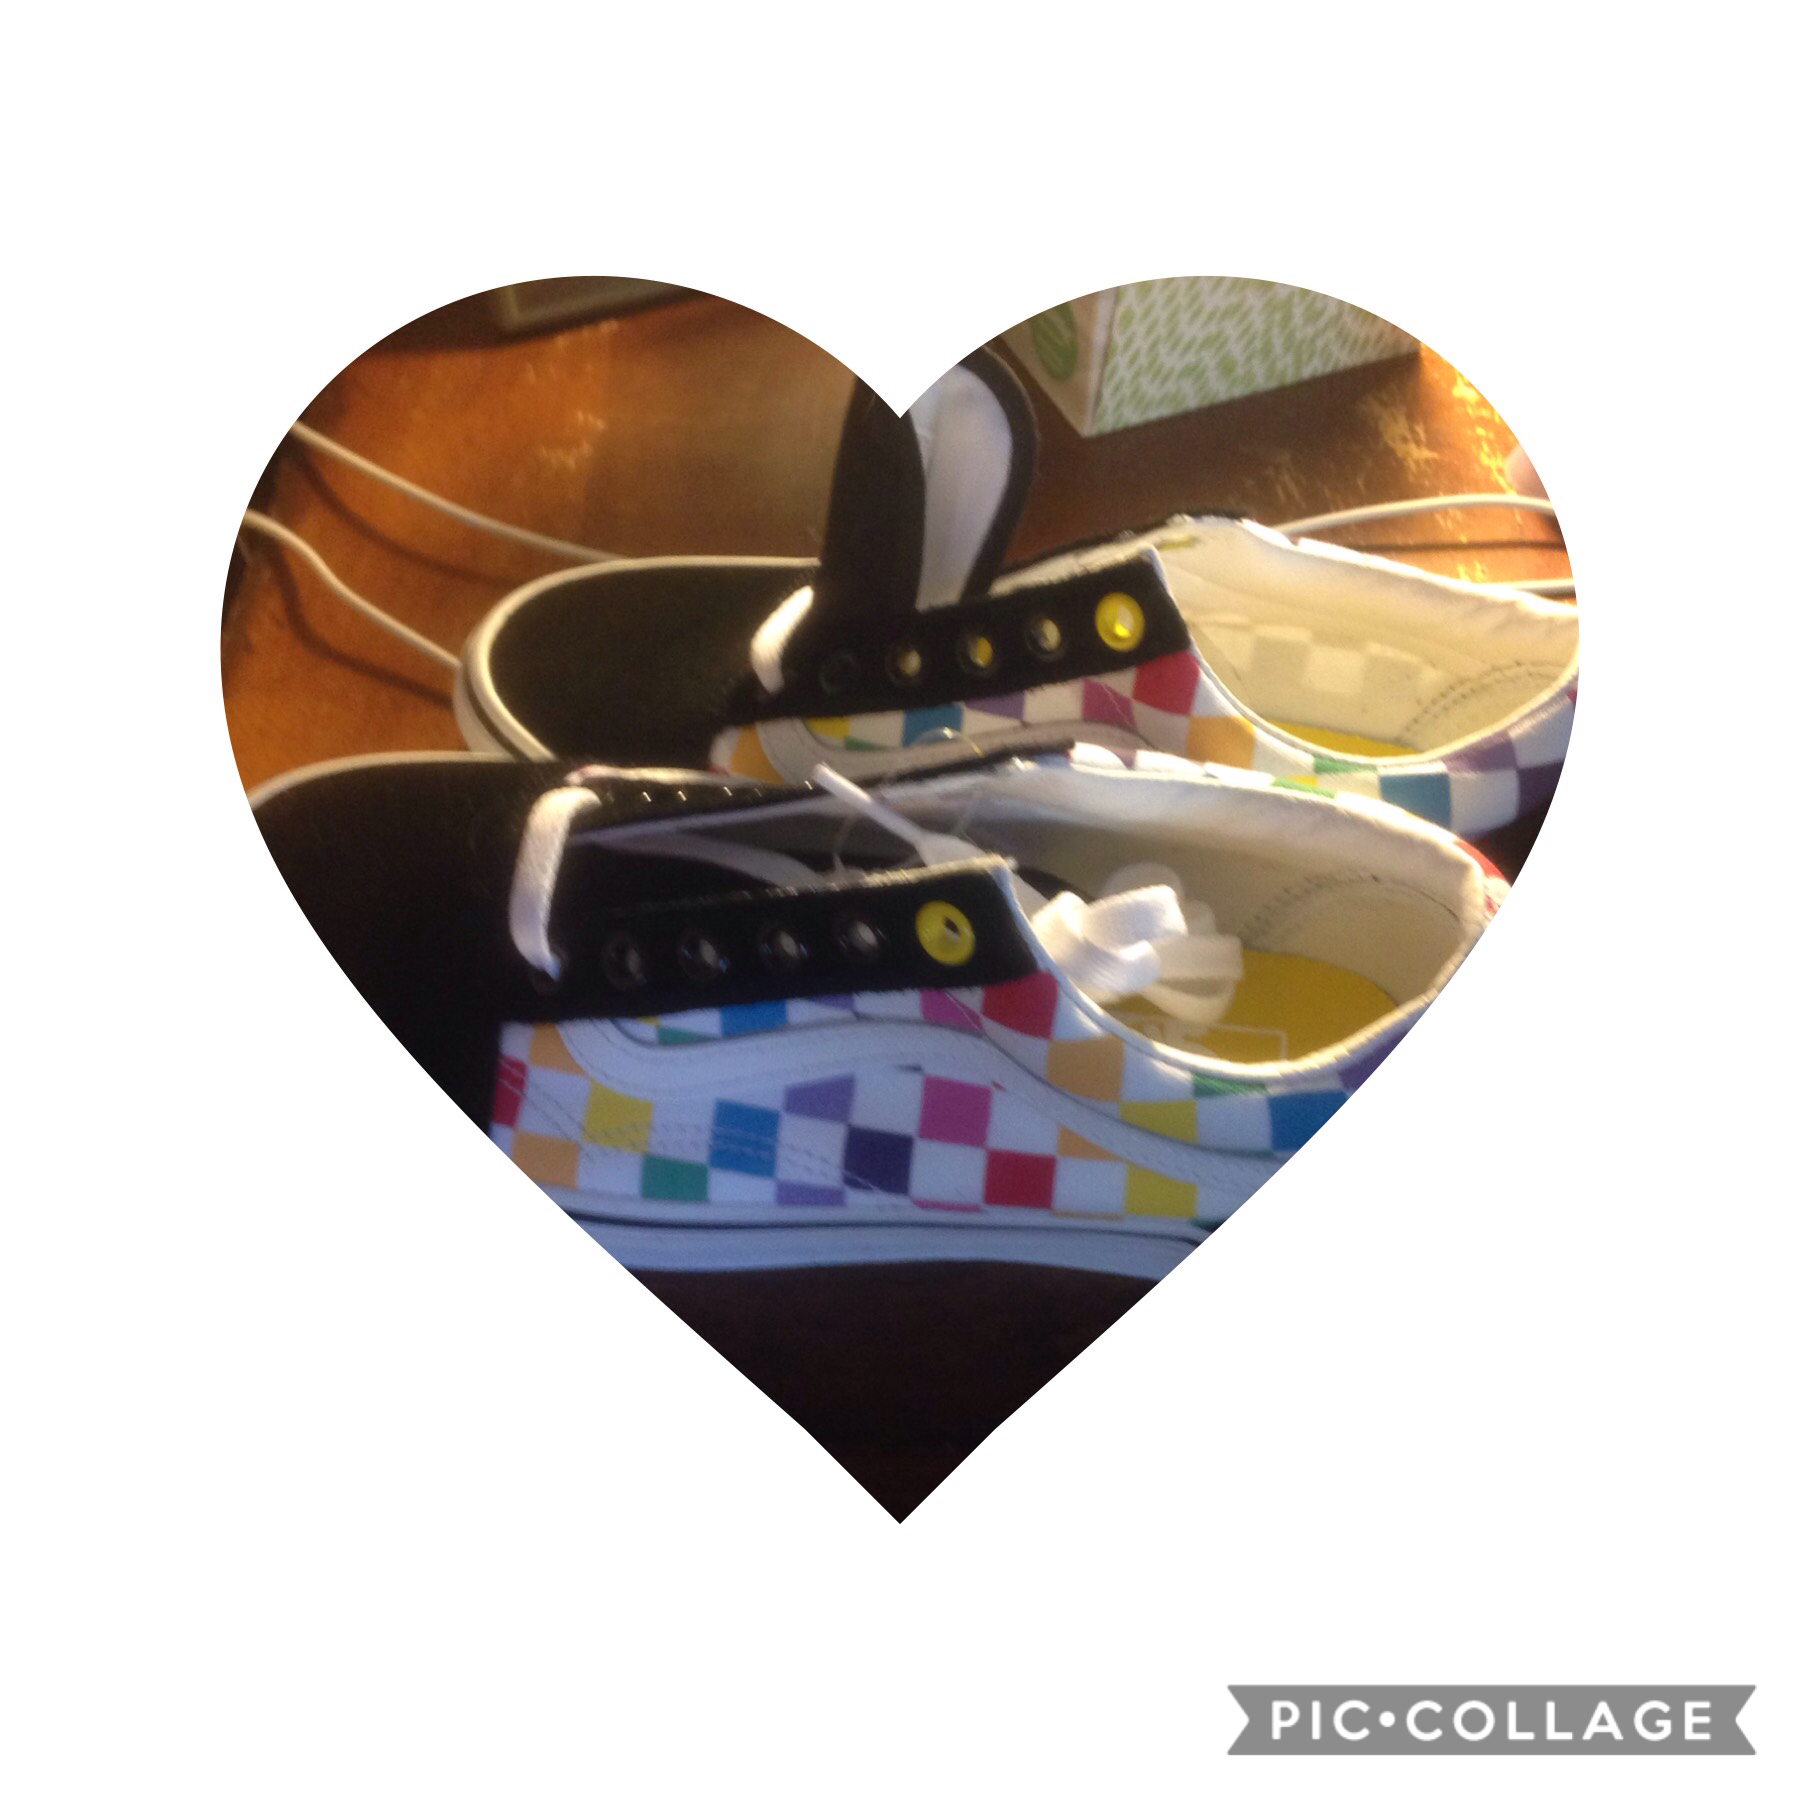 TAP 

COMMENT AND LOVE IF YOU LIKE VANS TOO